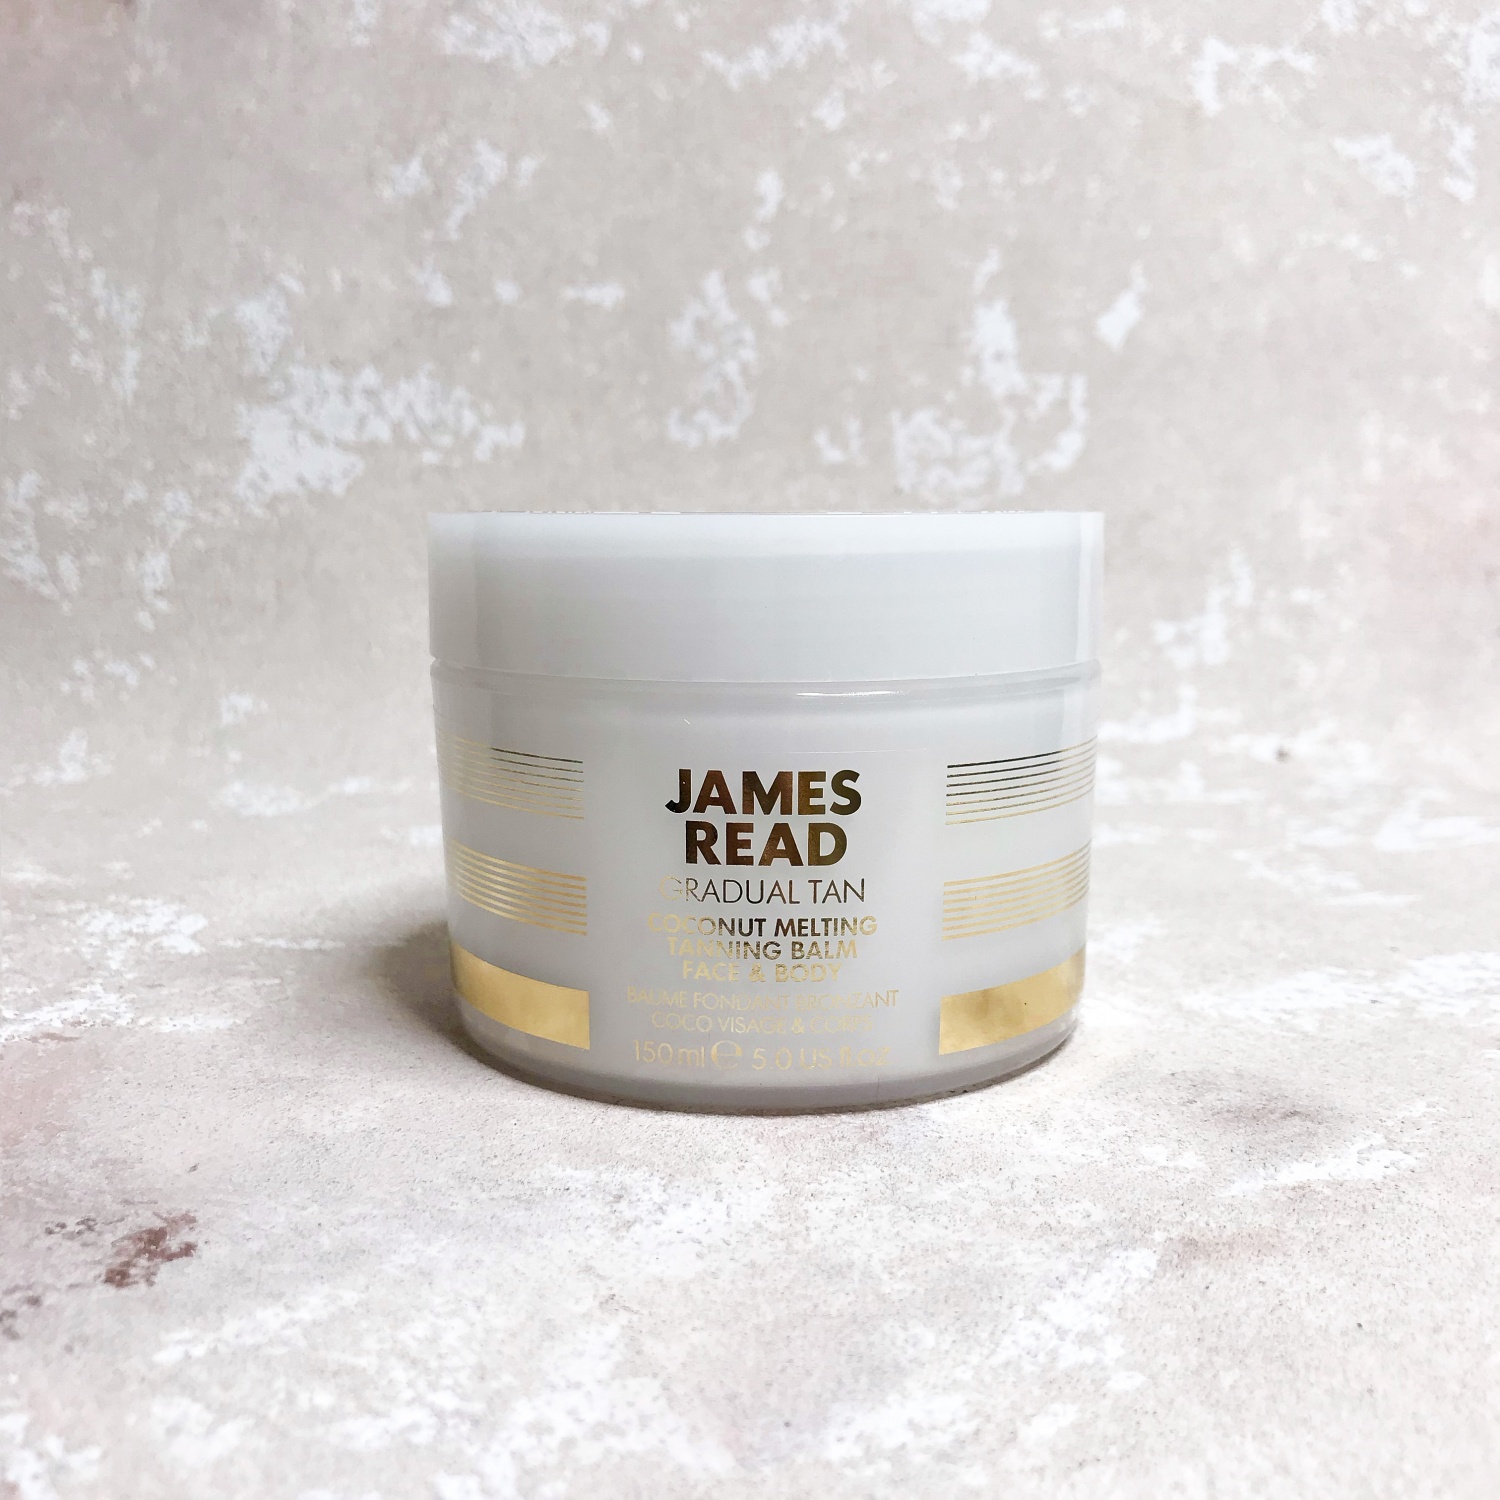 James Read COCONUT MELTING TANNING BALM FACE & BODY  150 мл